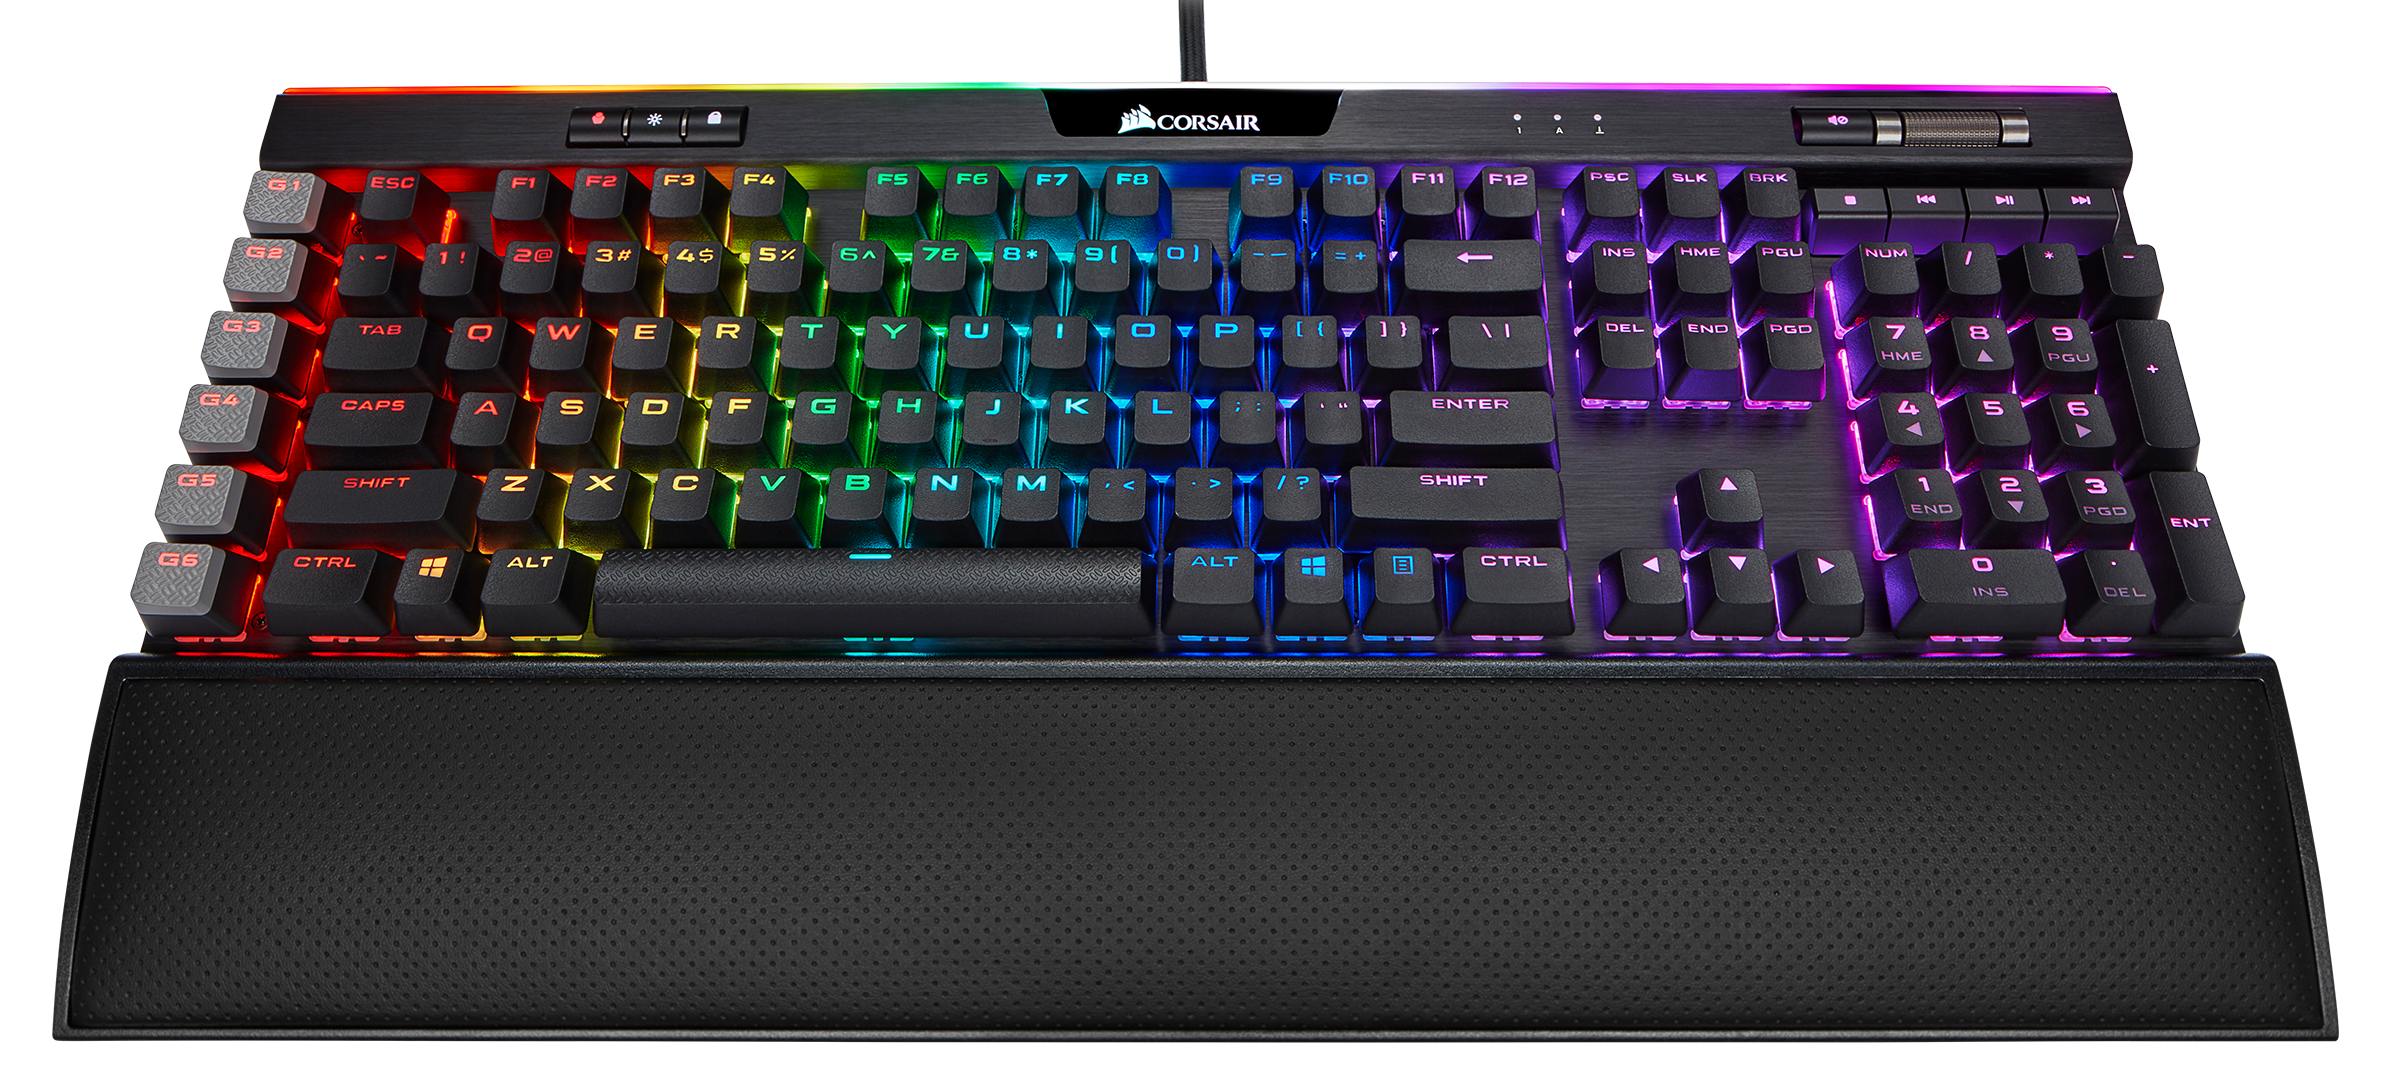 The Corsair RGB Platinum XT Mechanical Keyboard, Gamers and Streamers